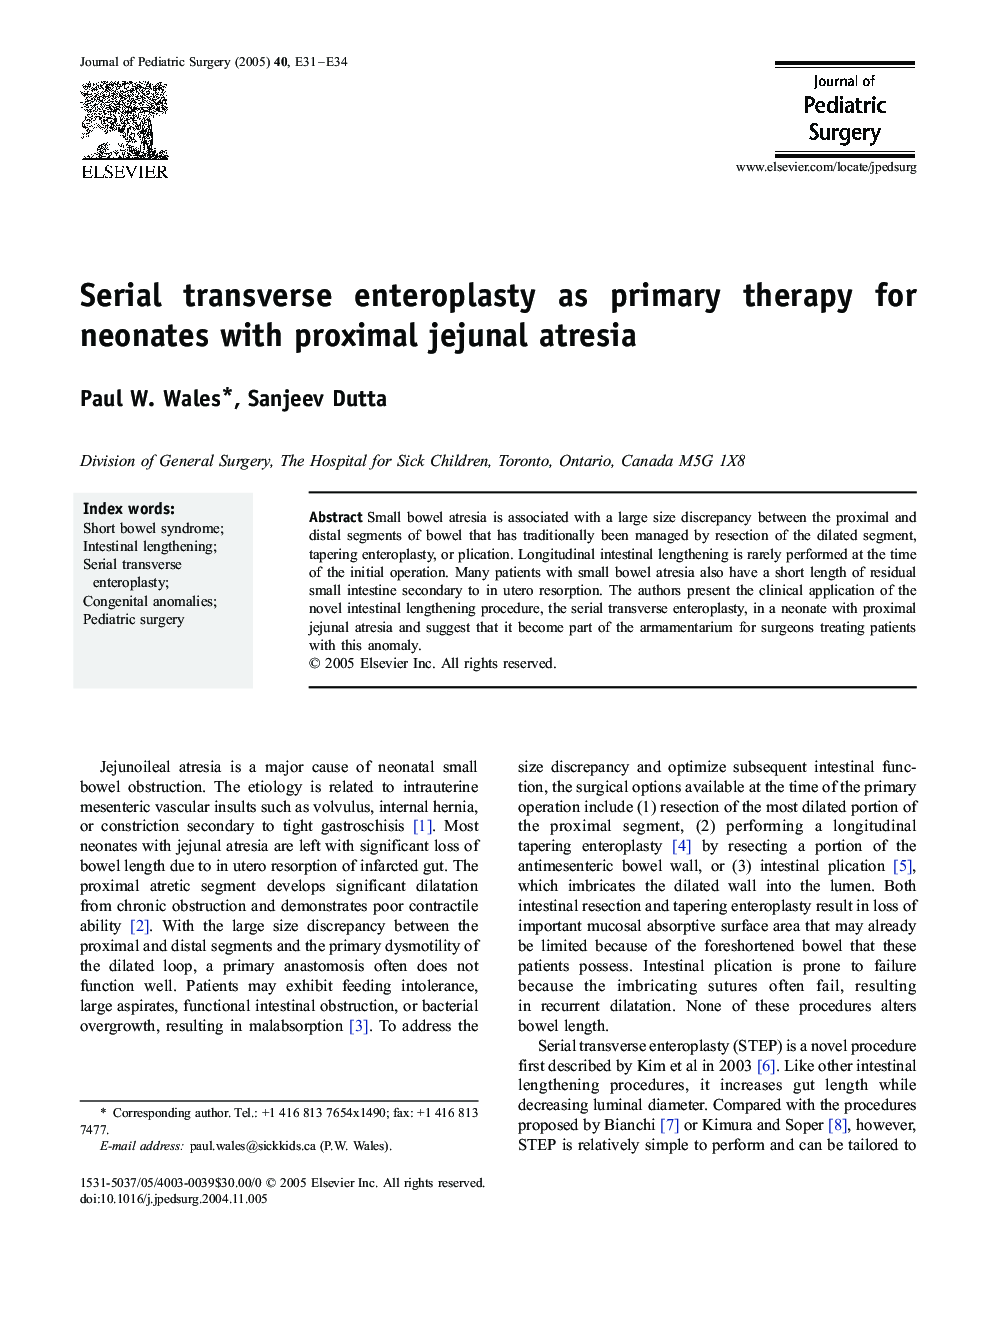 Serial transverse enteroplasty as primary therapy for neonates with proximal jejunal atresia